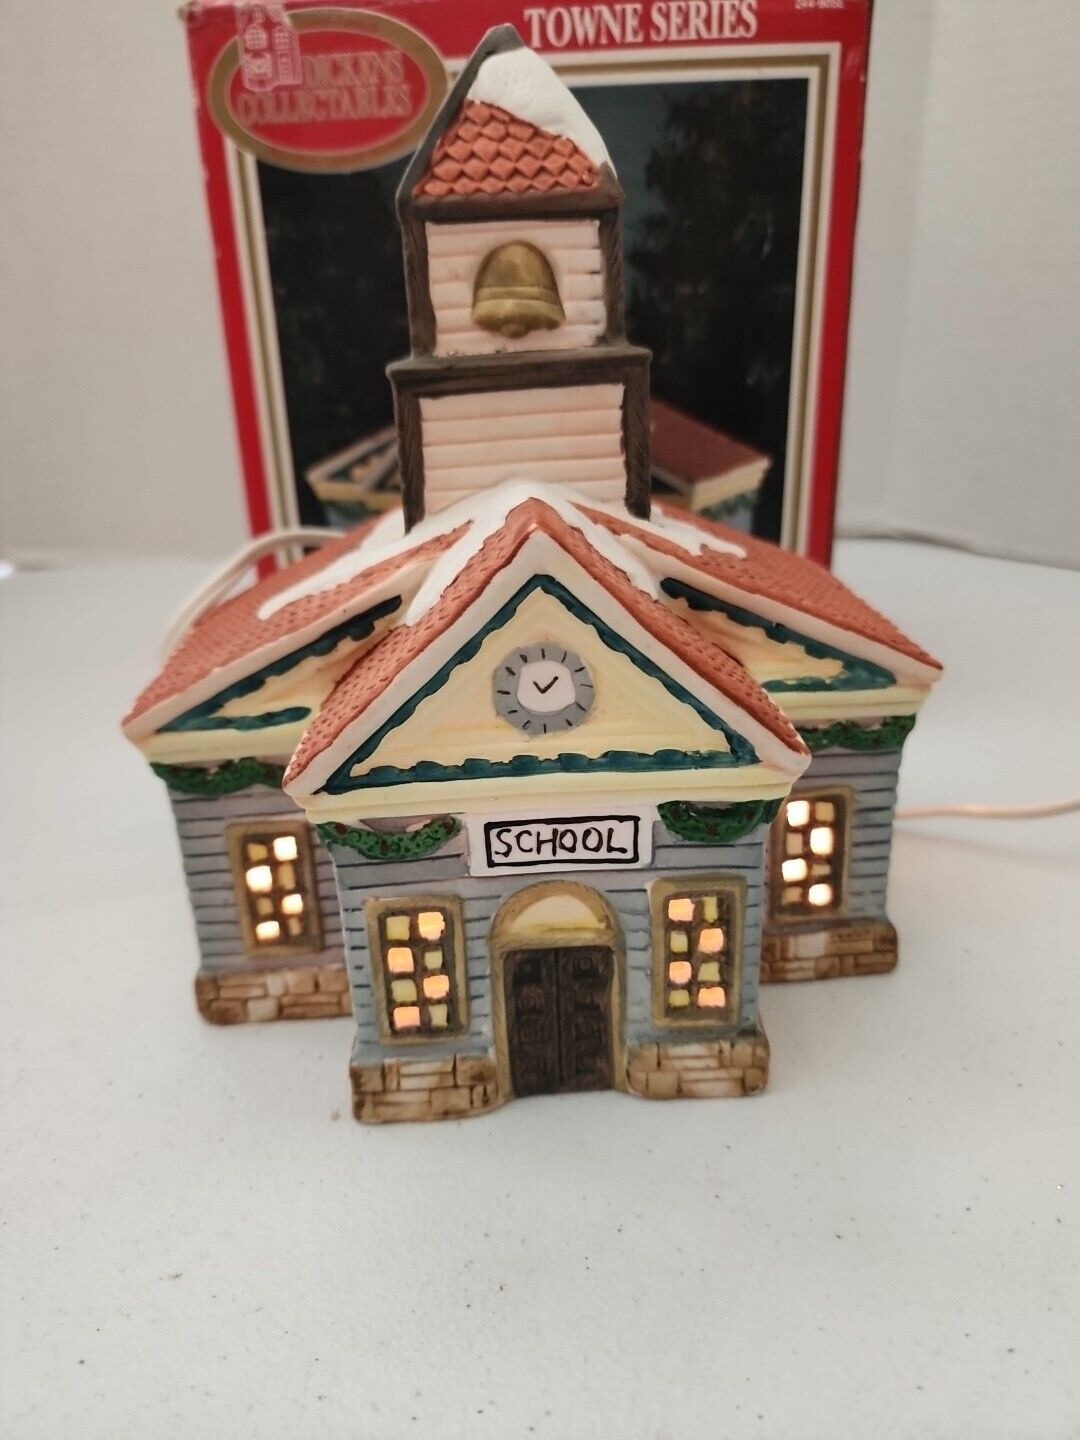  HOLIDAY EXPRESSIONS CHRISTMAS VILLAGE “SCHOOL” HANDPAINTED LIGHTED HOUSE 